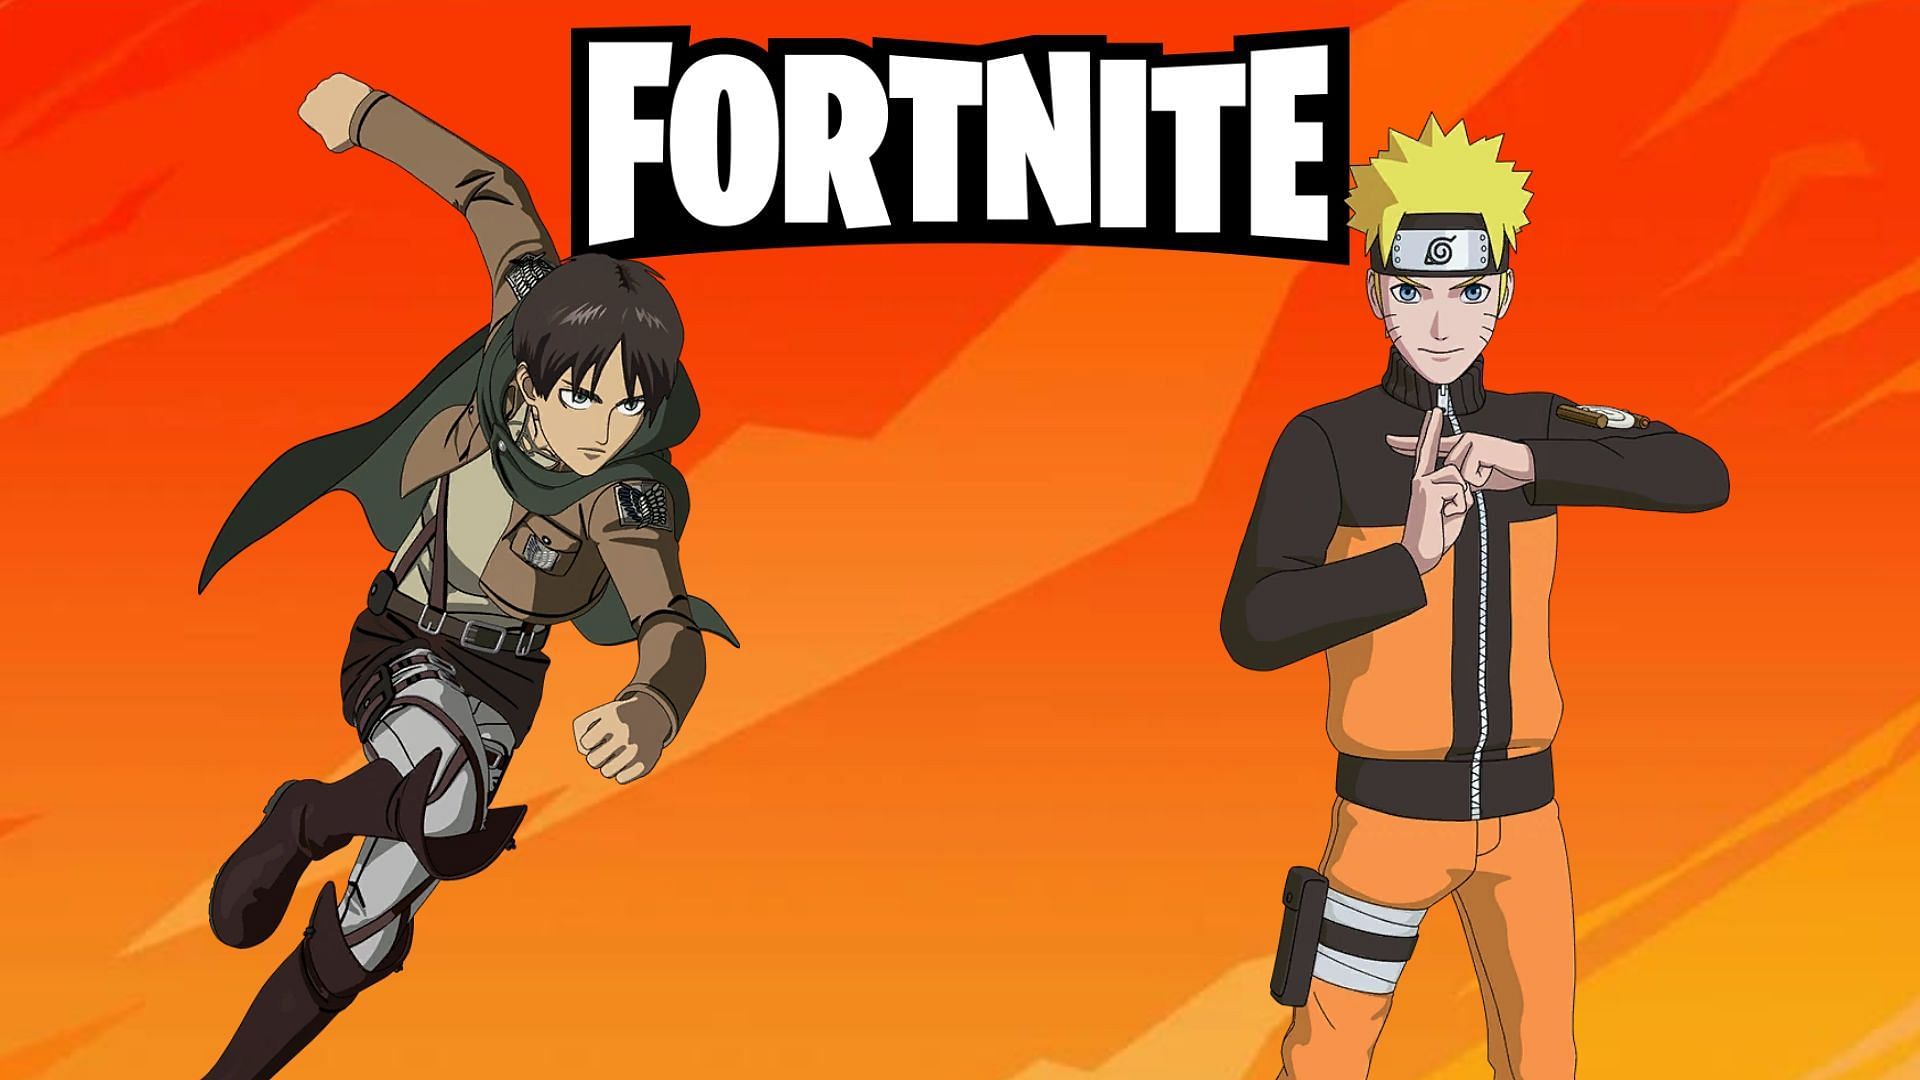 Anime skins are regrettably pay-to-lose in Fortnite (Image via Epic Games/Fortnite)